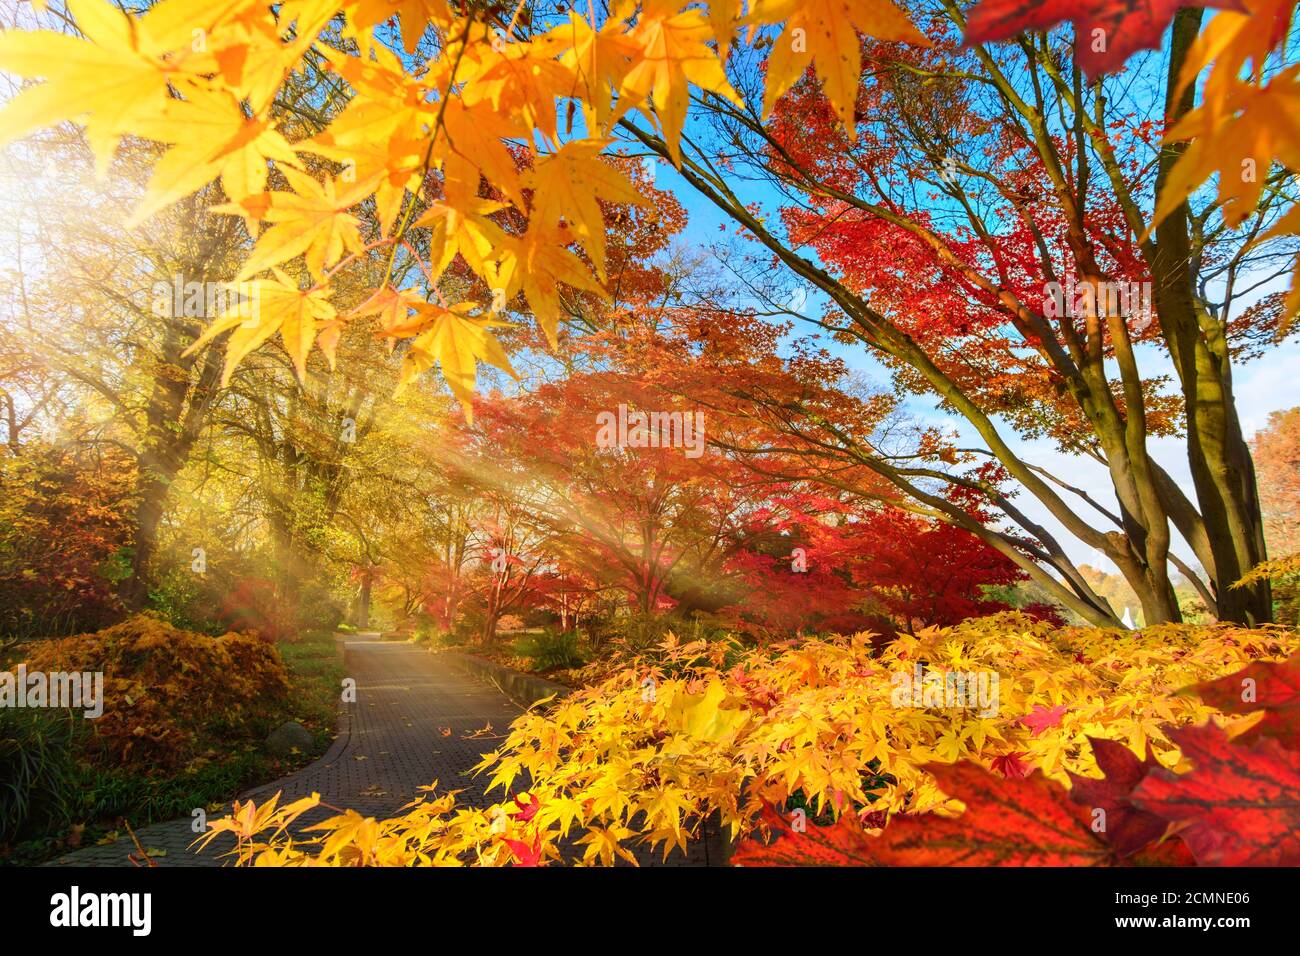 Colorful change of season in a park: autumn scenery with Japanese maple and other trees, with blue sky and lit by rays of sunlight Stock Photo